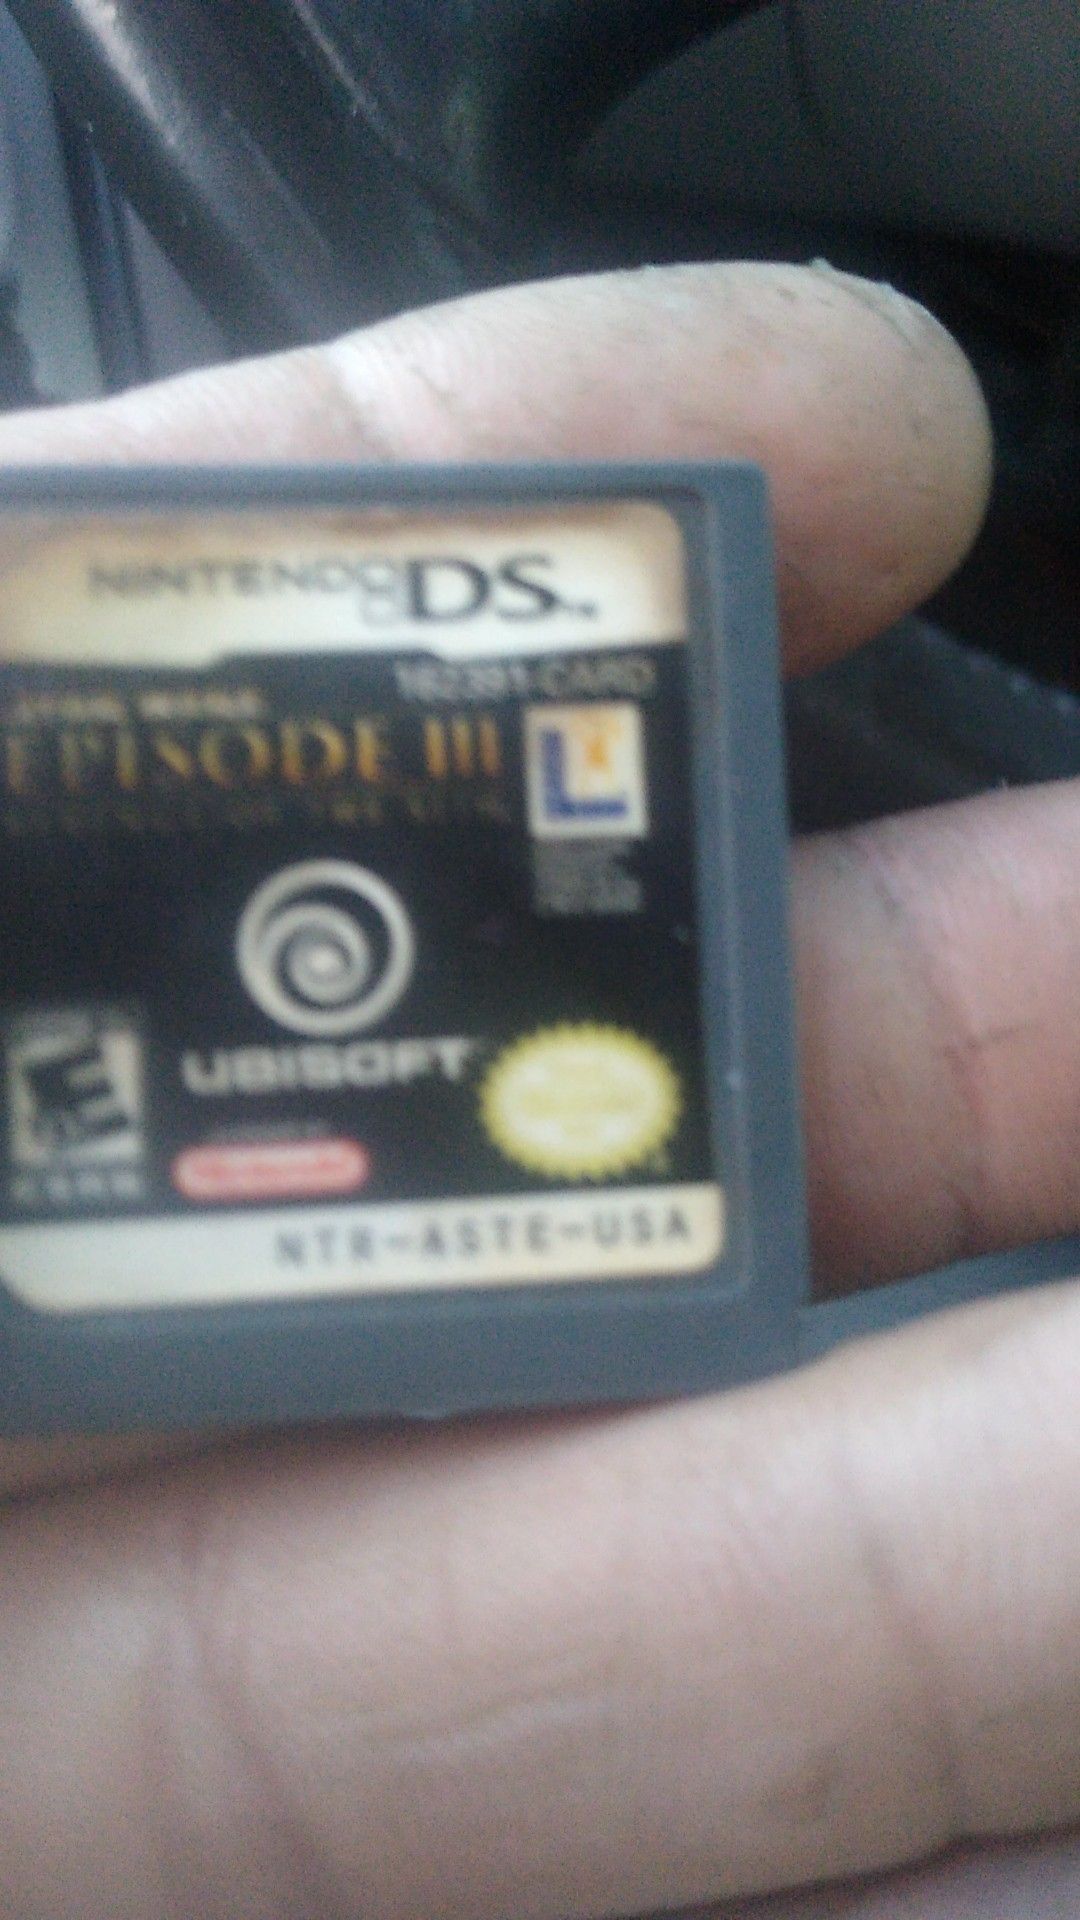 Two DS games for the kids